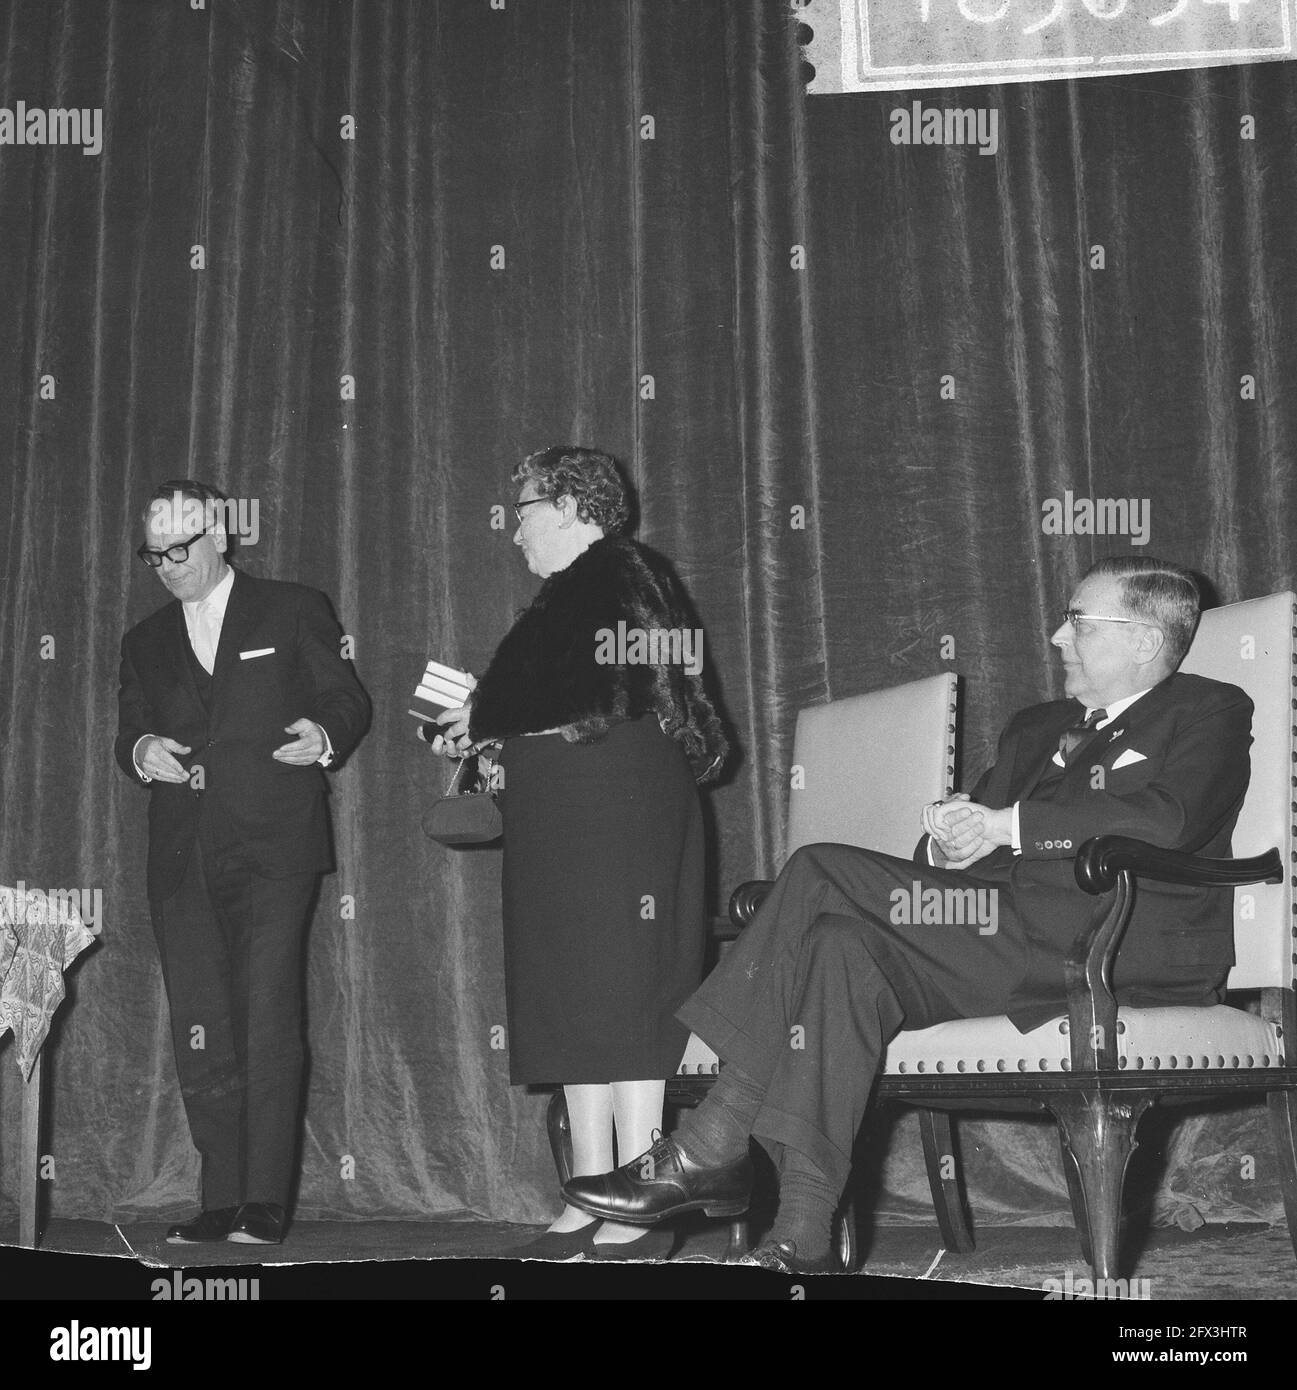 Minister Vrolijk (l.) and Mrs. Heijermans (center), October 26, 1965, literature, ceremonies, drama, The Netherlands, 20th century press agency photo, news to remember, documentary, historic photography 1945-1990, visual stories, human history of the Twentieth Century, capturing moments in time Stock Photo